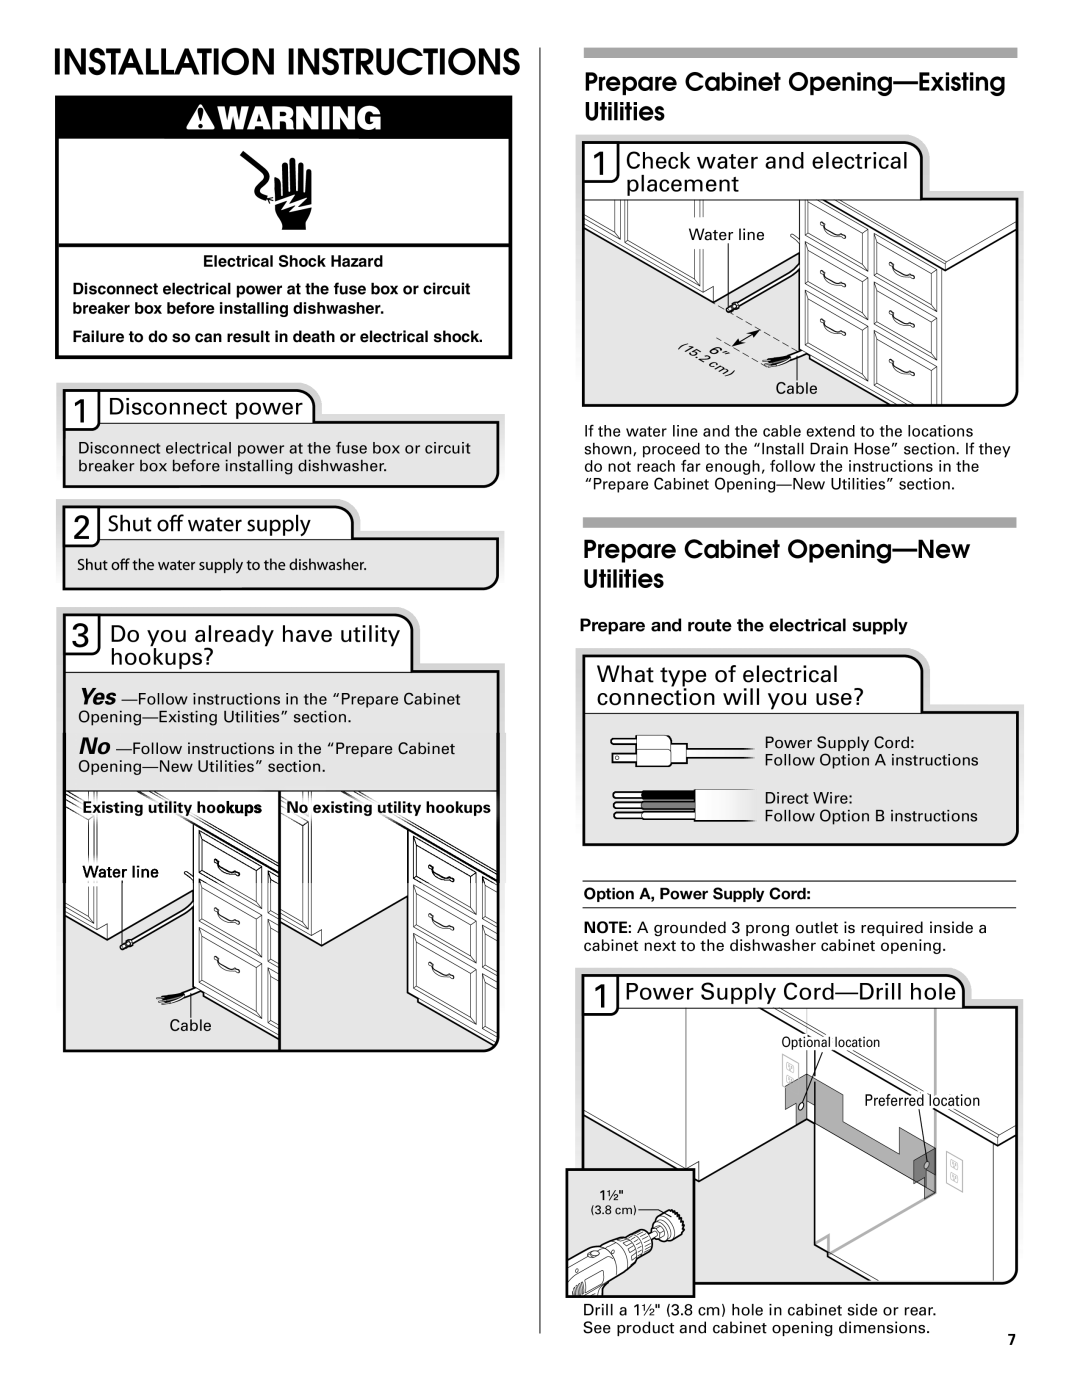 KitchenAid KUDE70FVPA Installation Instructions, Prepare Cabinet Opening-Existing Utilities, Disconnect power, Water line 